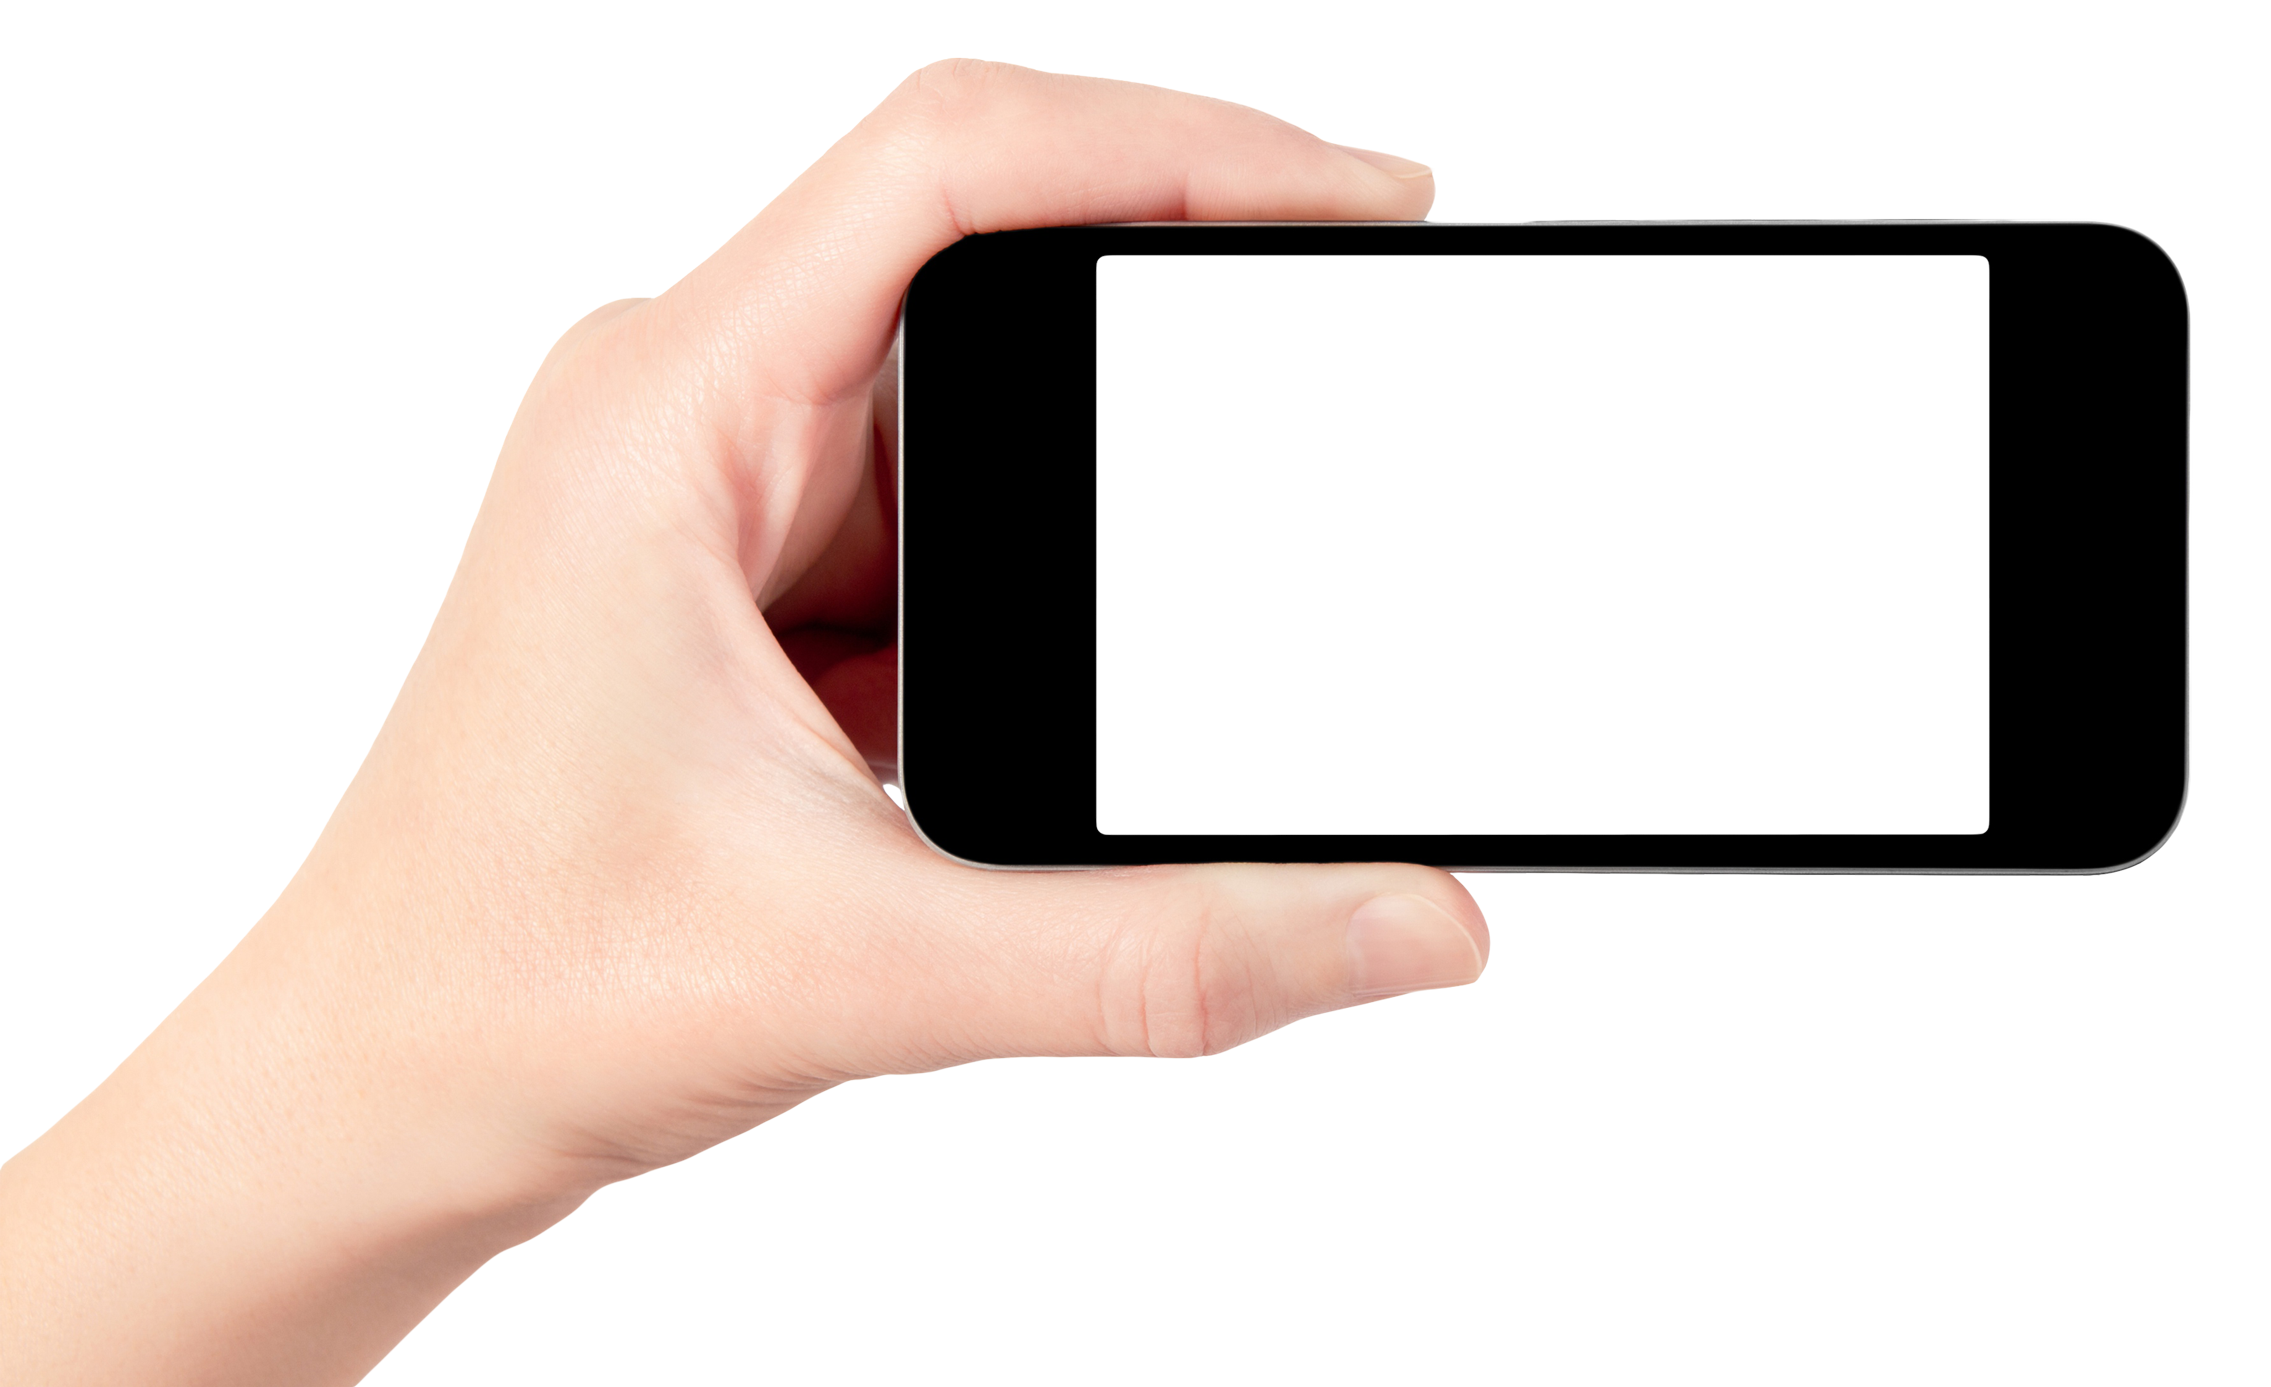 Smartphone in hand PNG